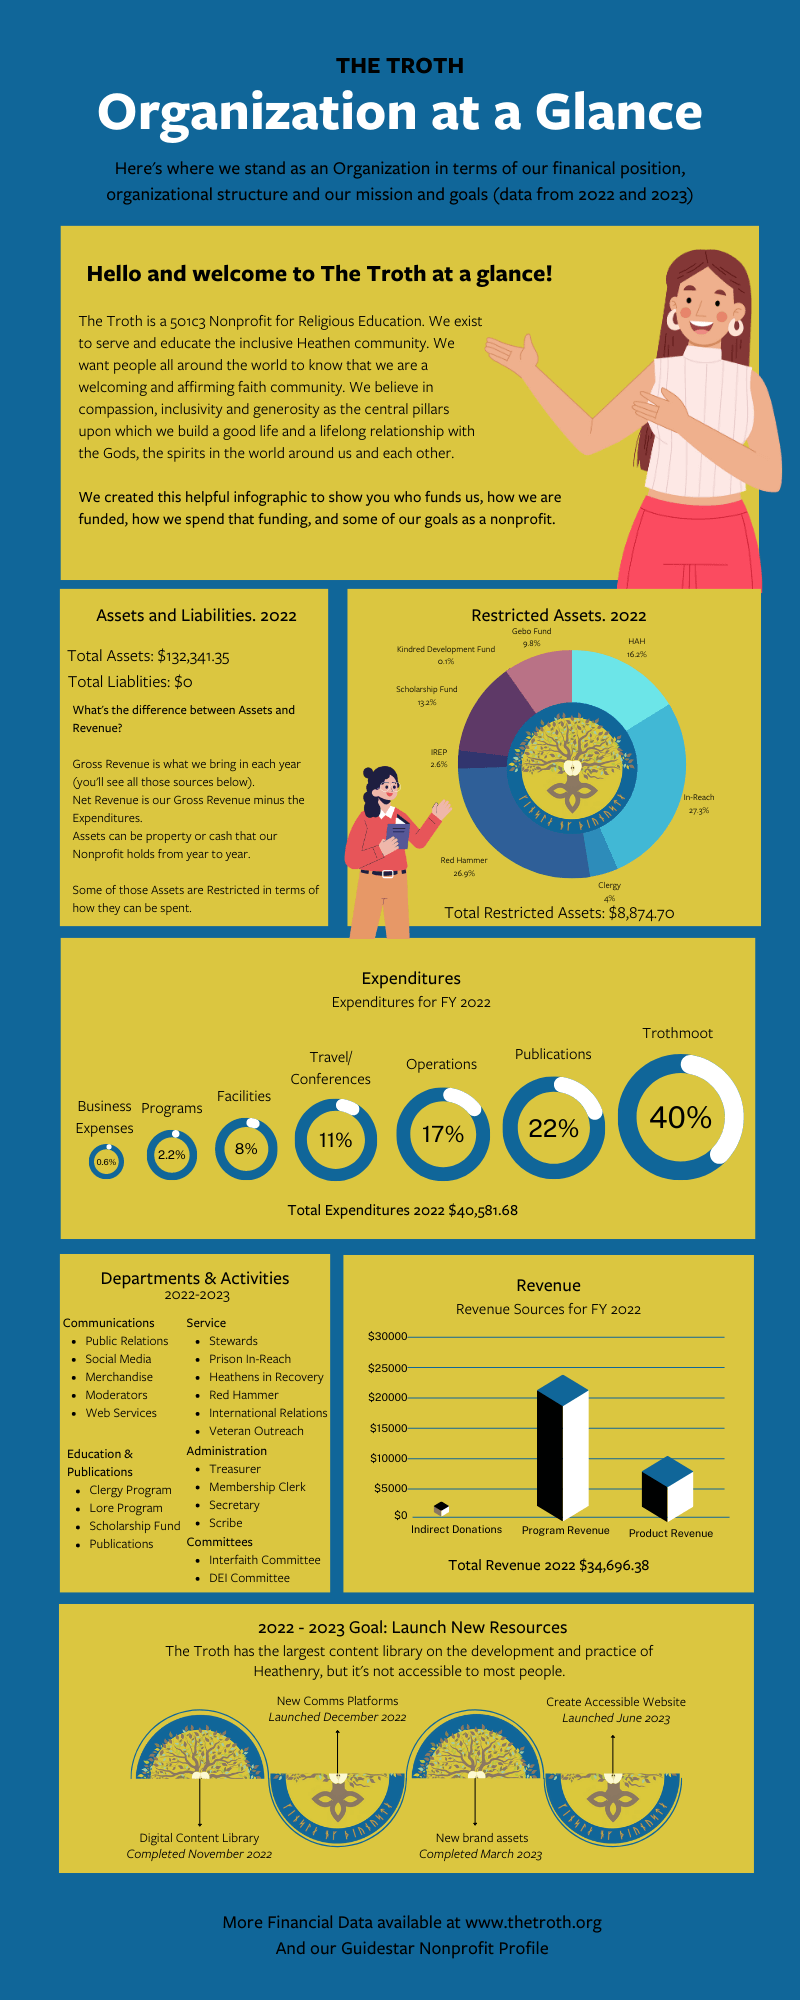 A Troth Infographic showing financial information